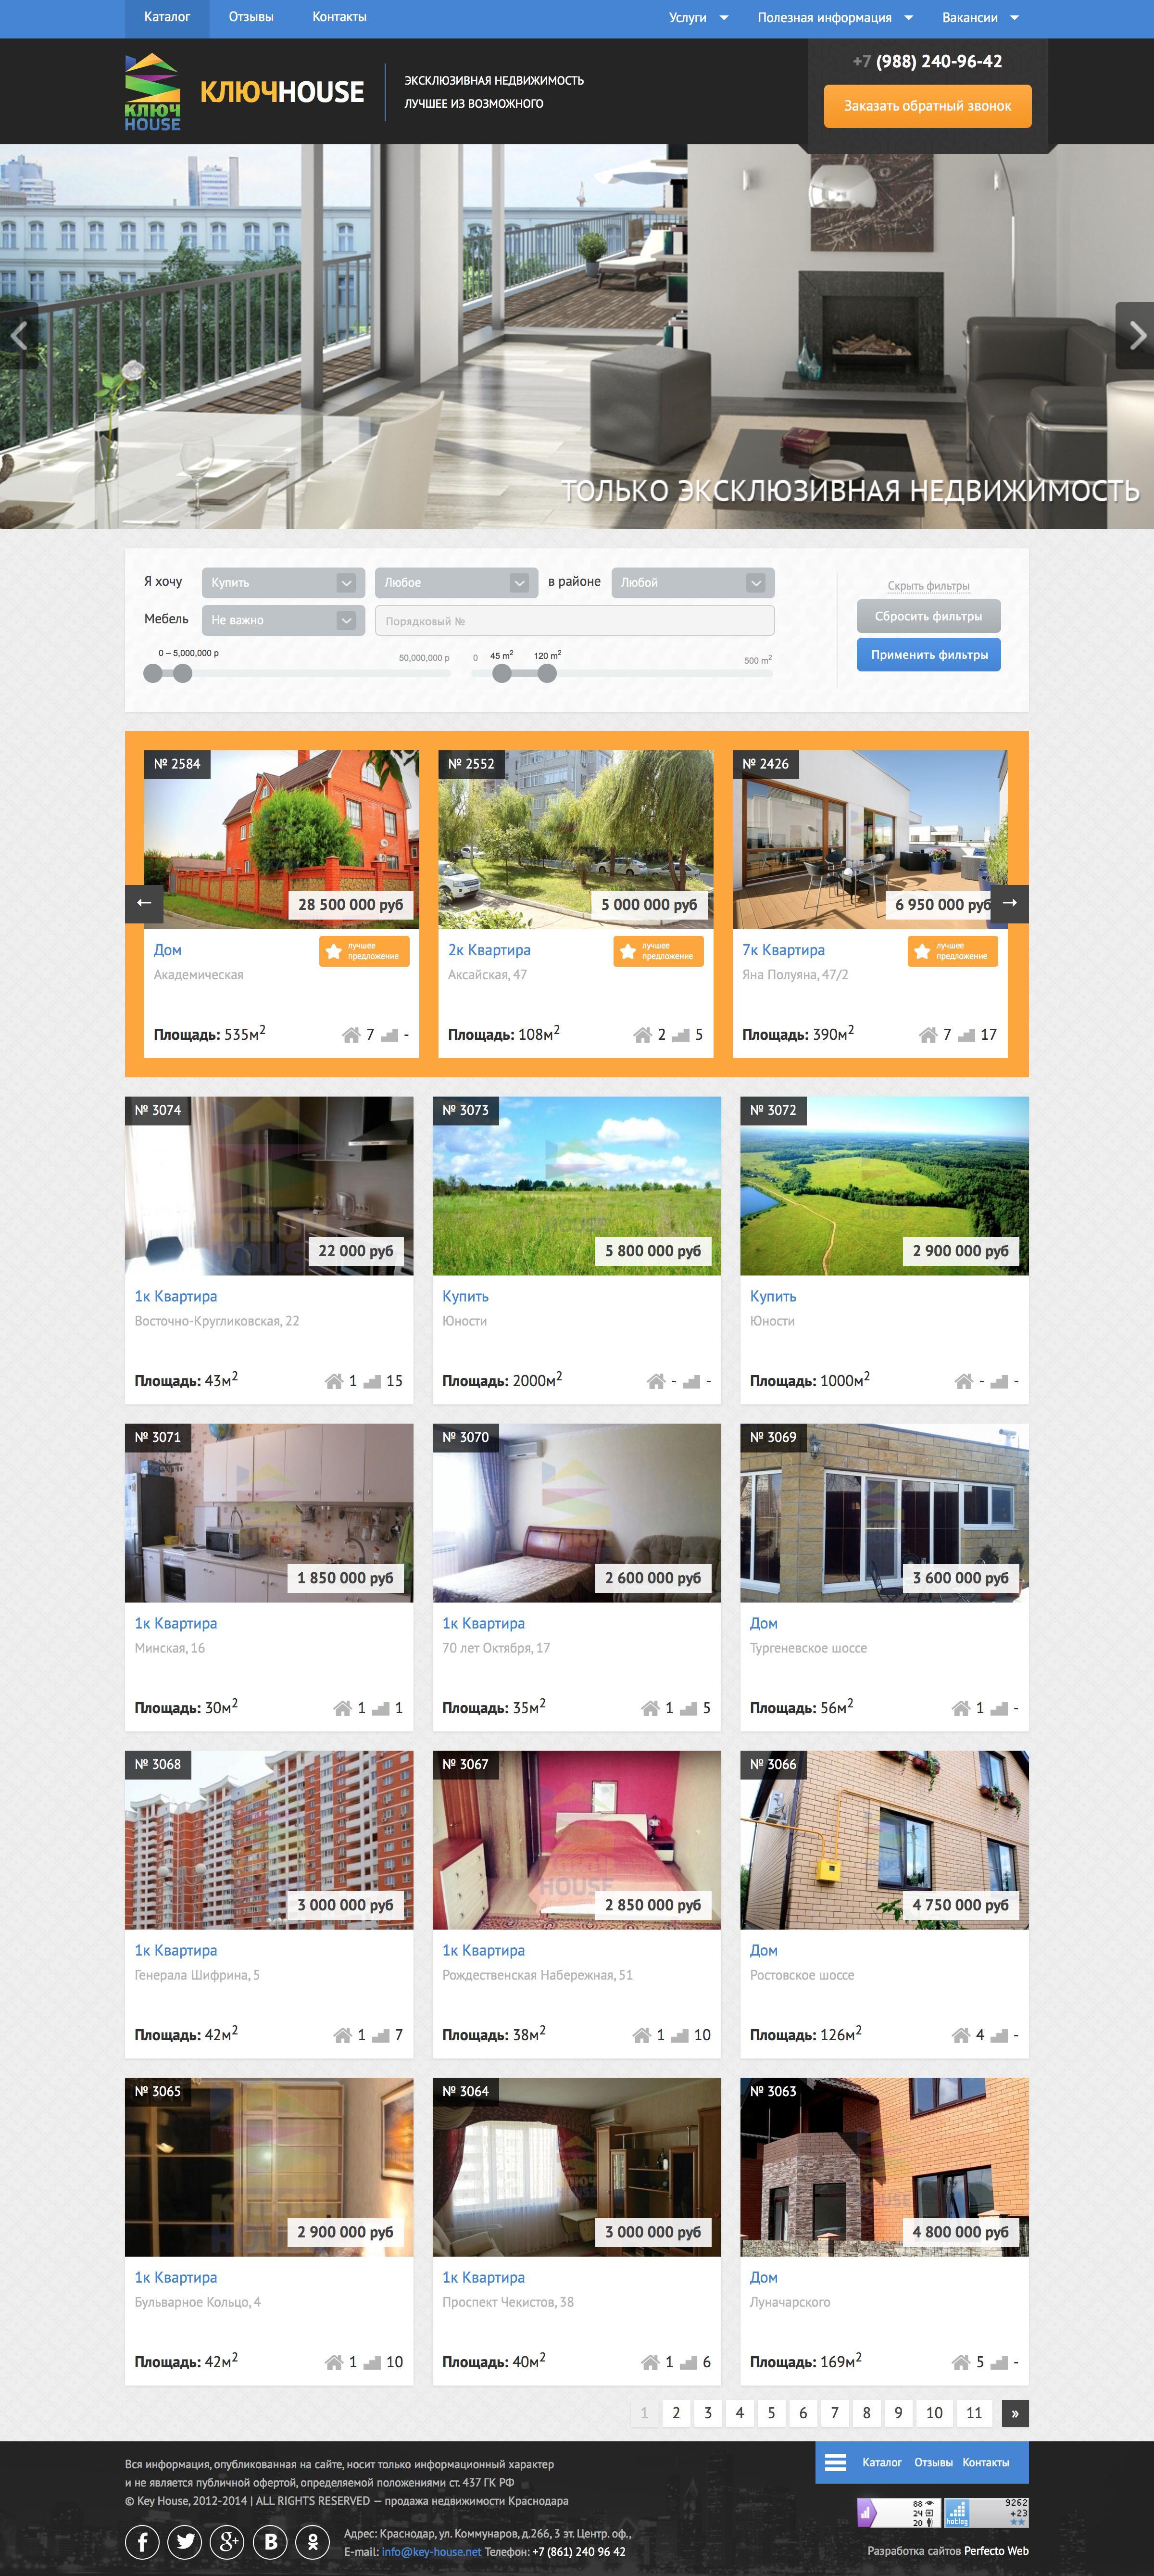 KeyHouse - Real Estate №1- Home page and catalog